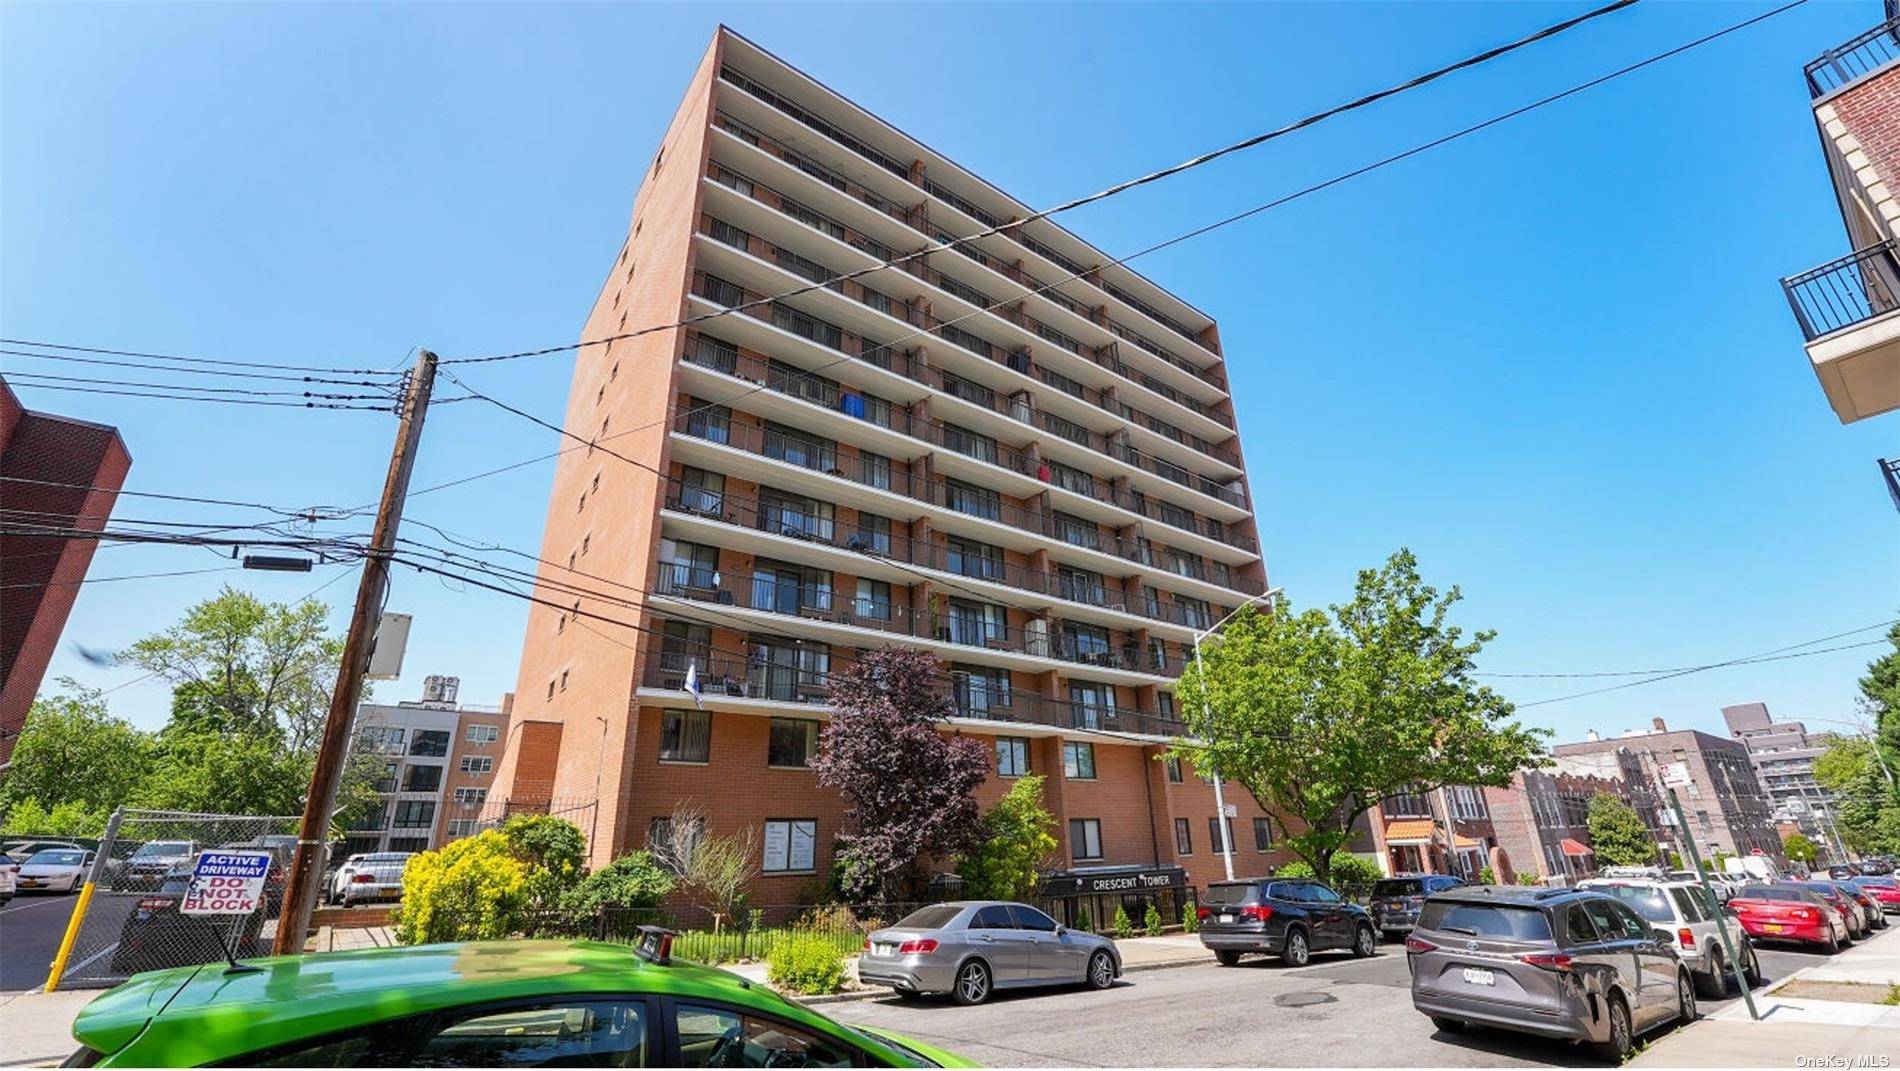 Located in Astoria, proximity to Mount Sinai Hospital and NYU Langone Medical Center.